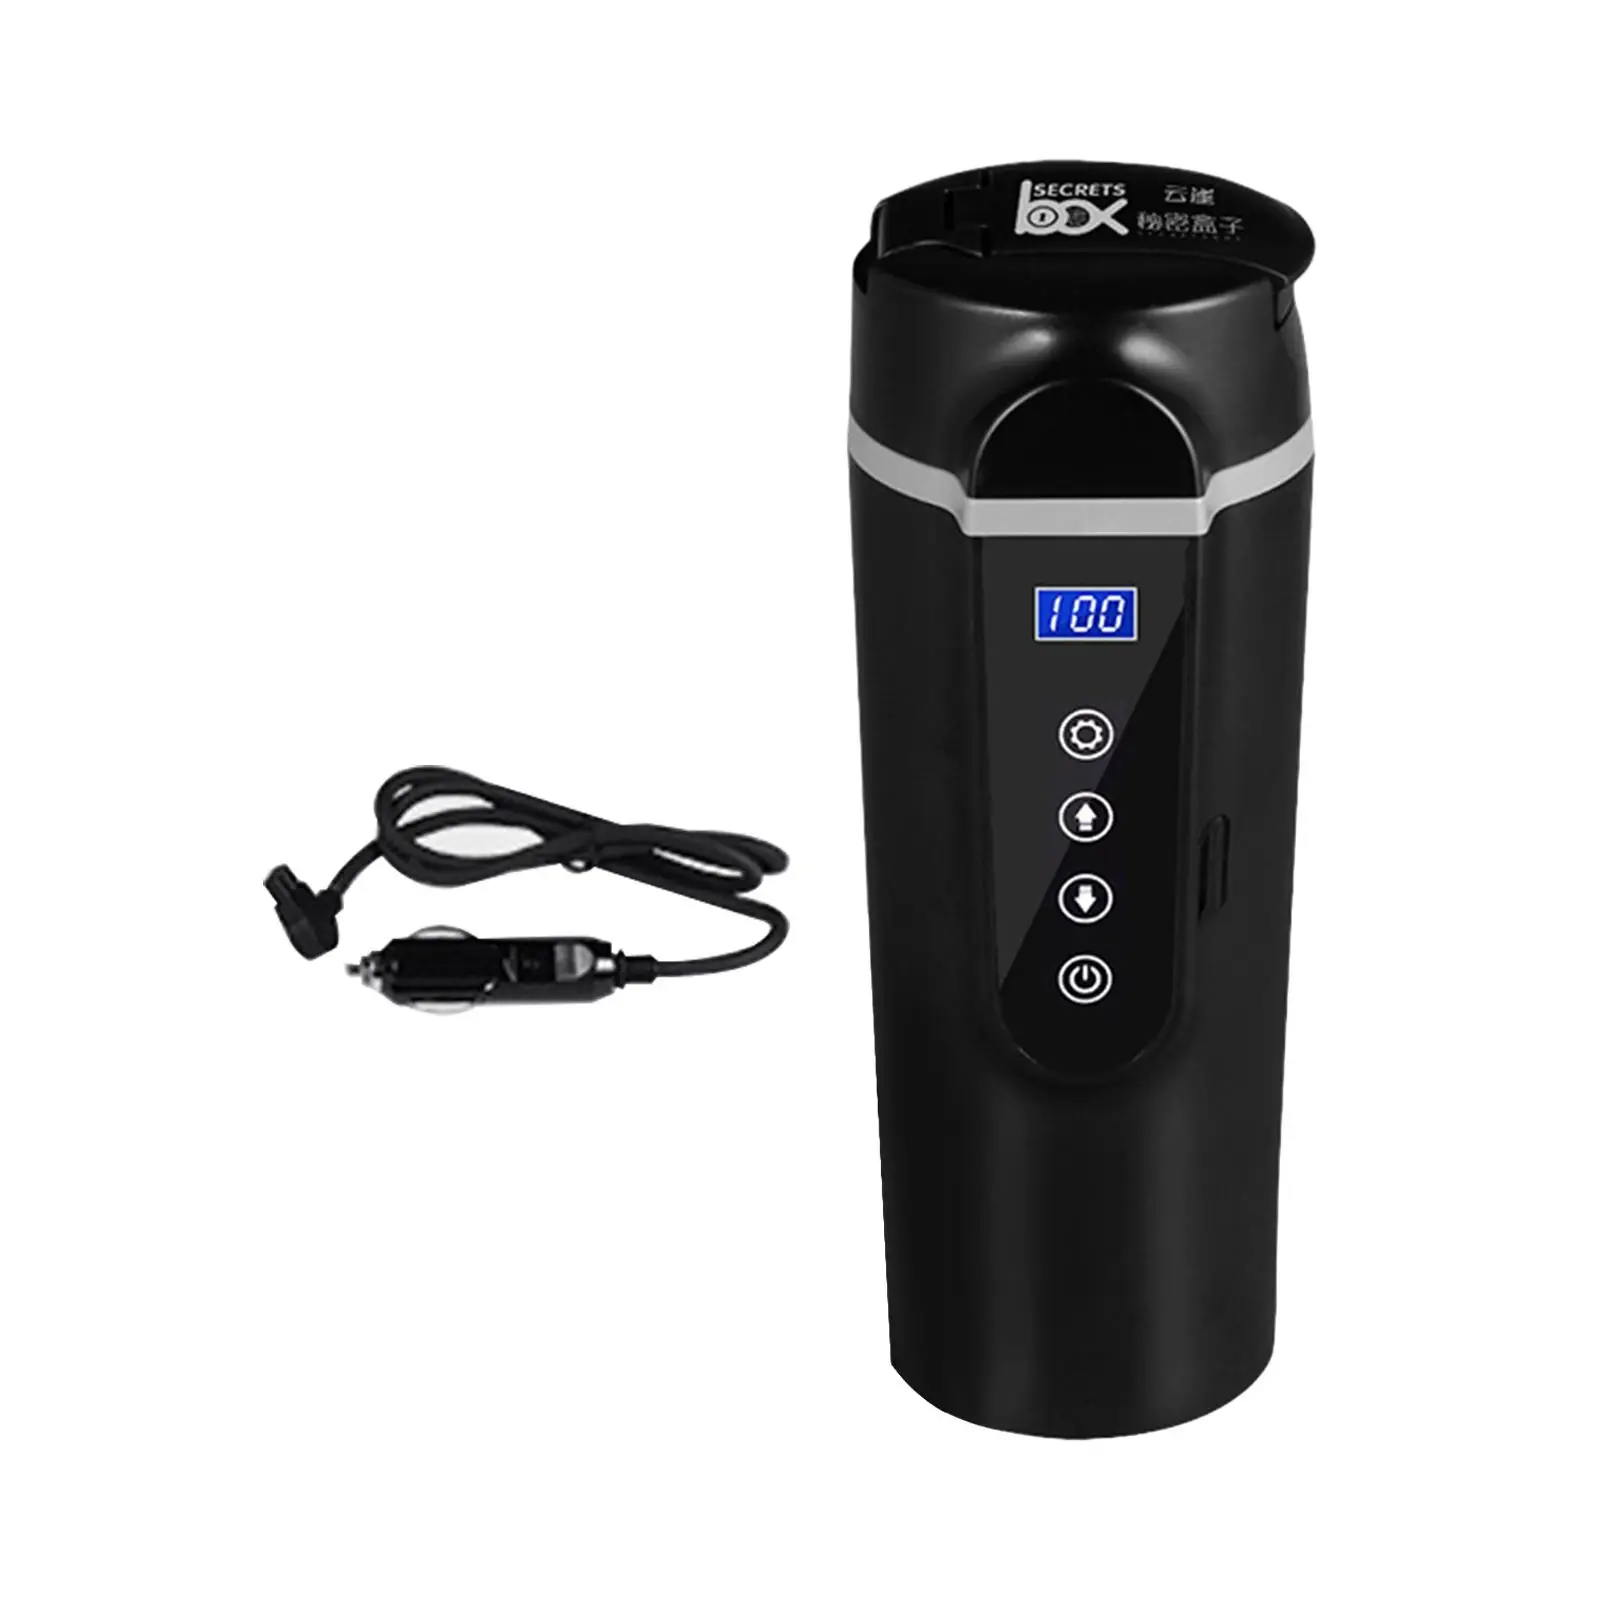 24V/12V Car Traveling Kettle Hot Water Boiler LED Display Travel Coffee Mugs Warmer for Trip Vehicles Camping Auto Car Airplane